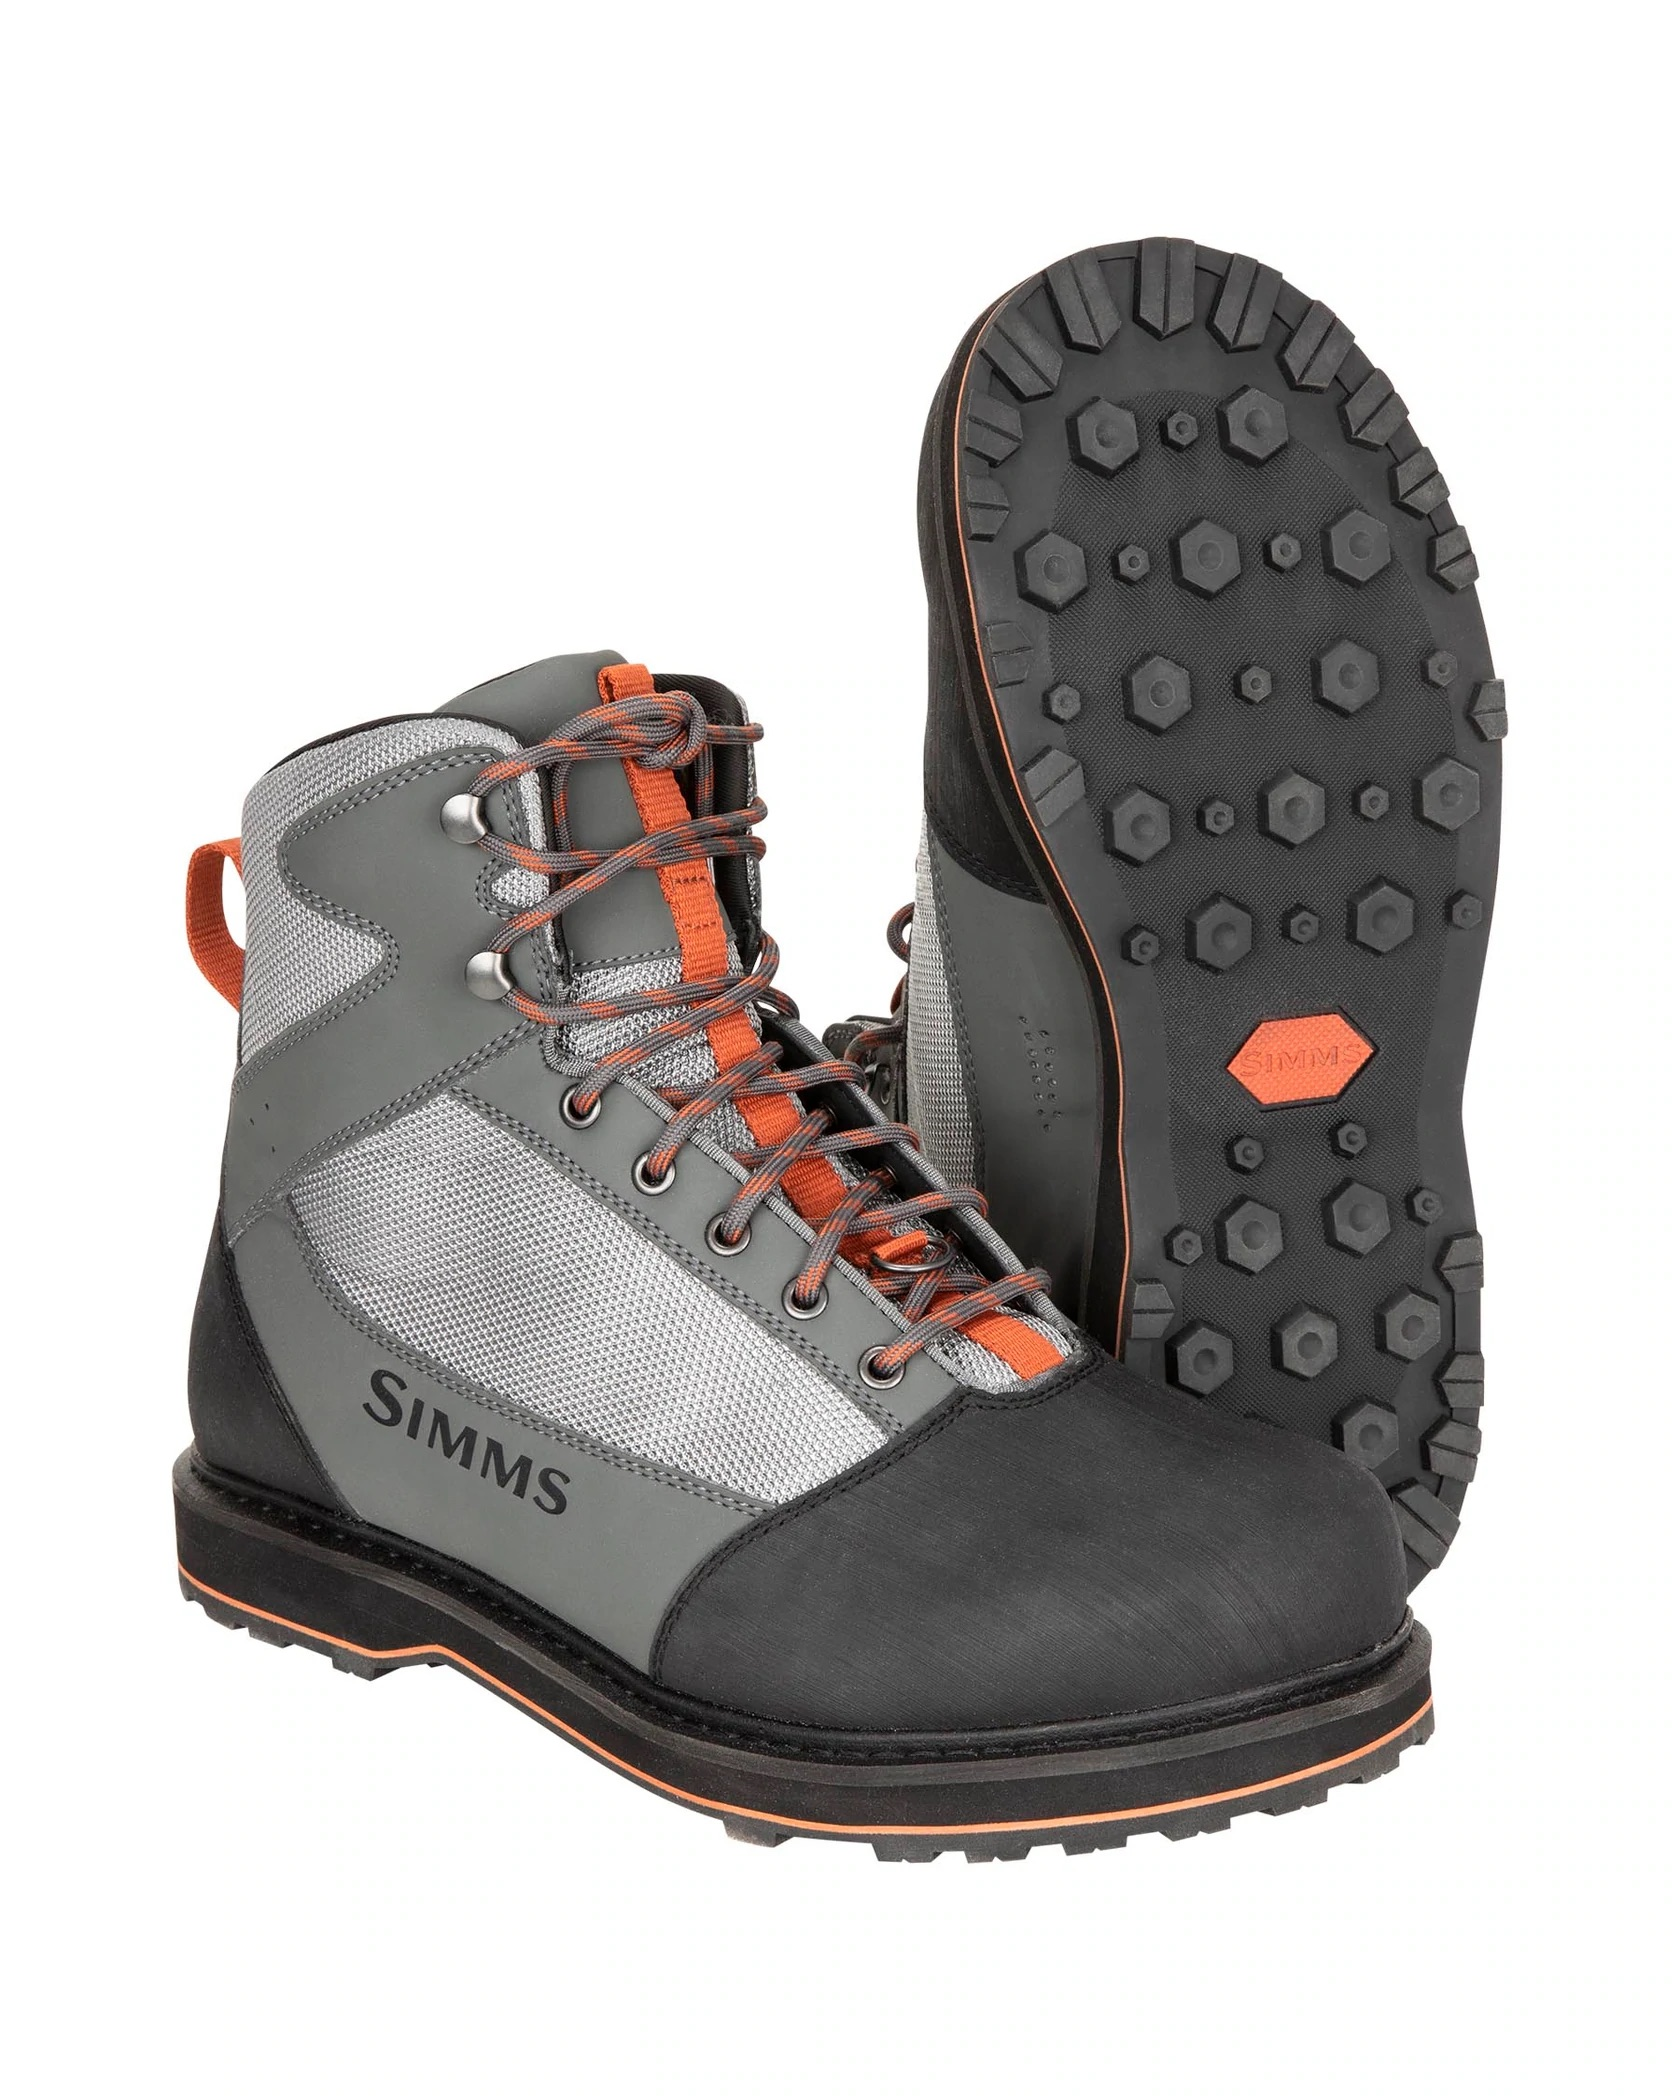 Simms Tributary Boot - Rubber - Size 14